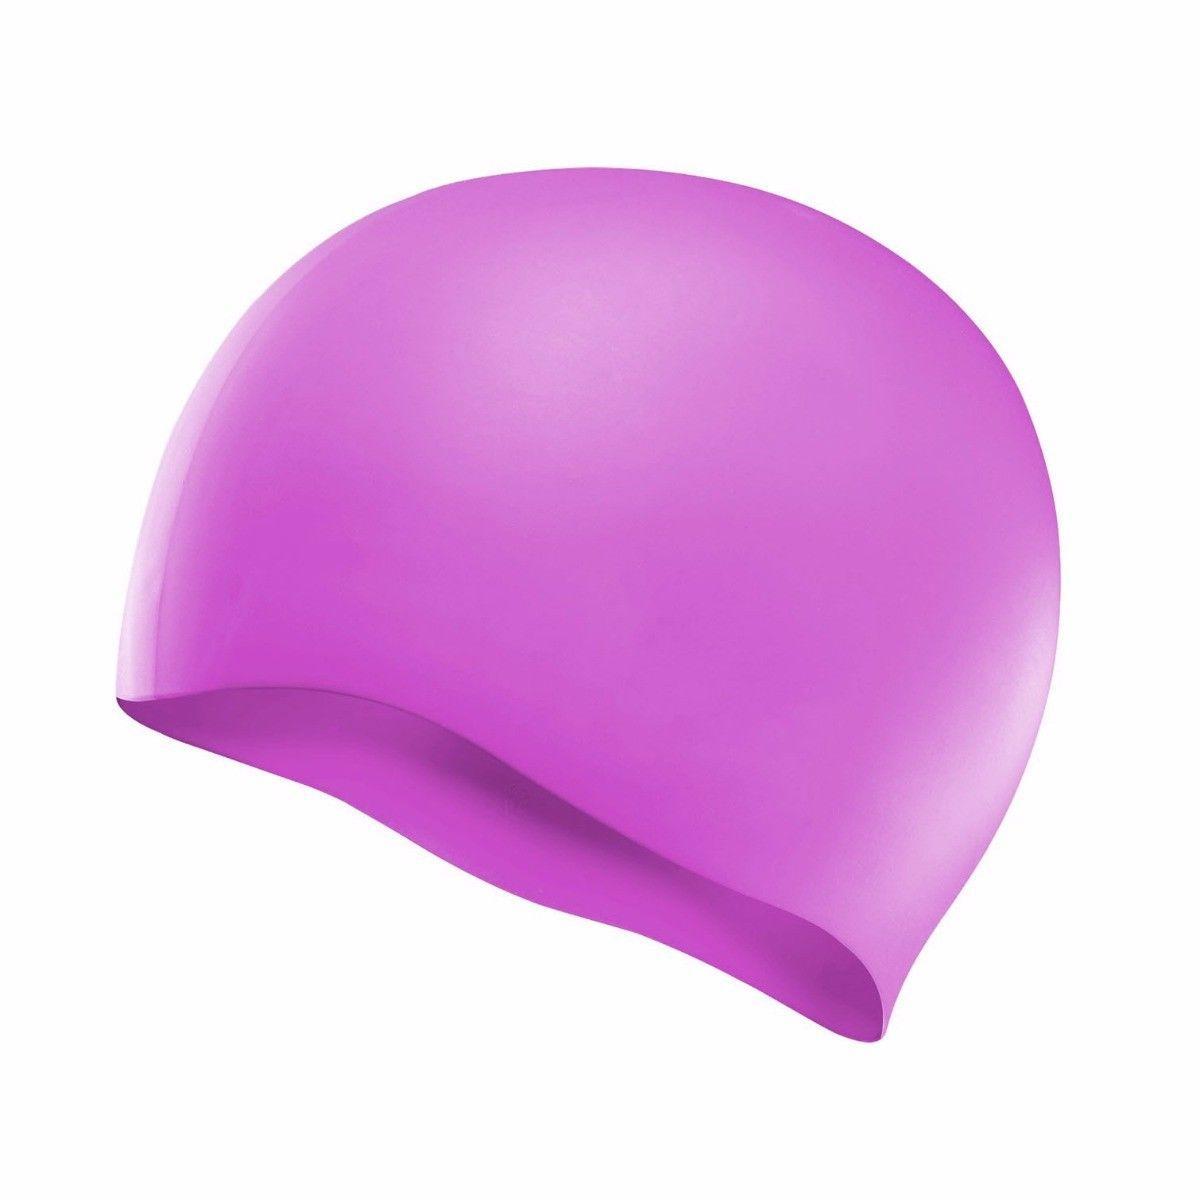 Silicone Long Lasting & Waterproof Swimming Hat / Cap One Size Outdoors 2142 (Large Letter Rate)